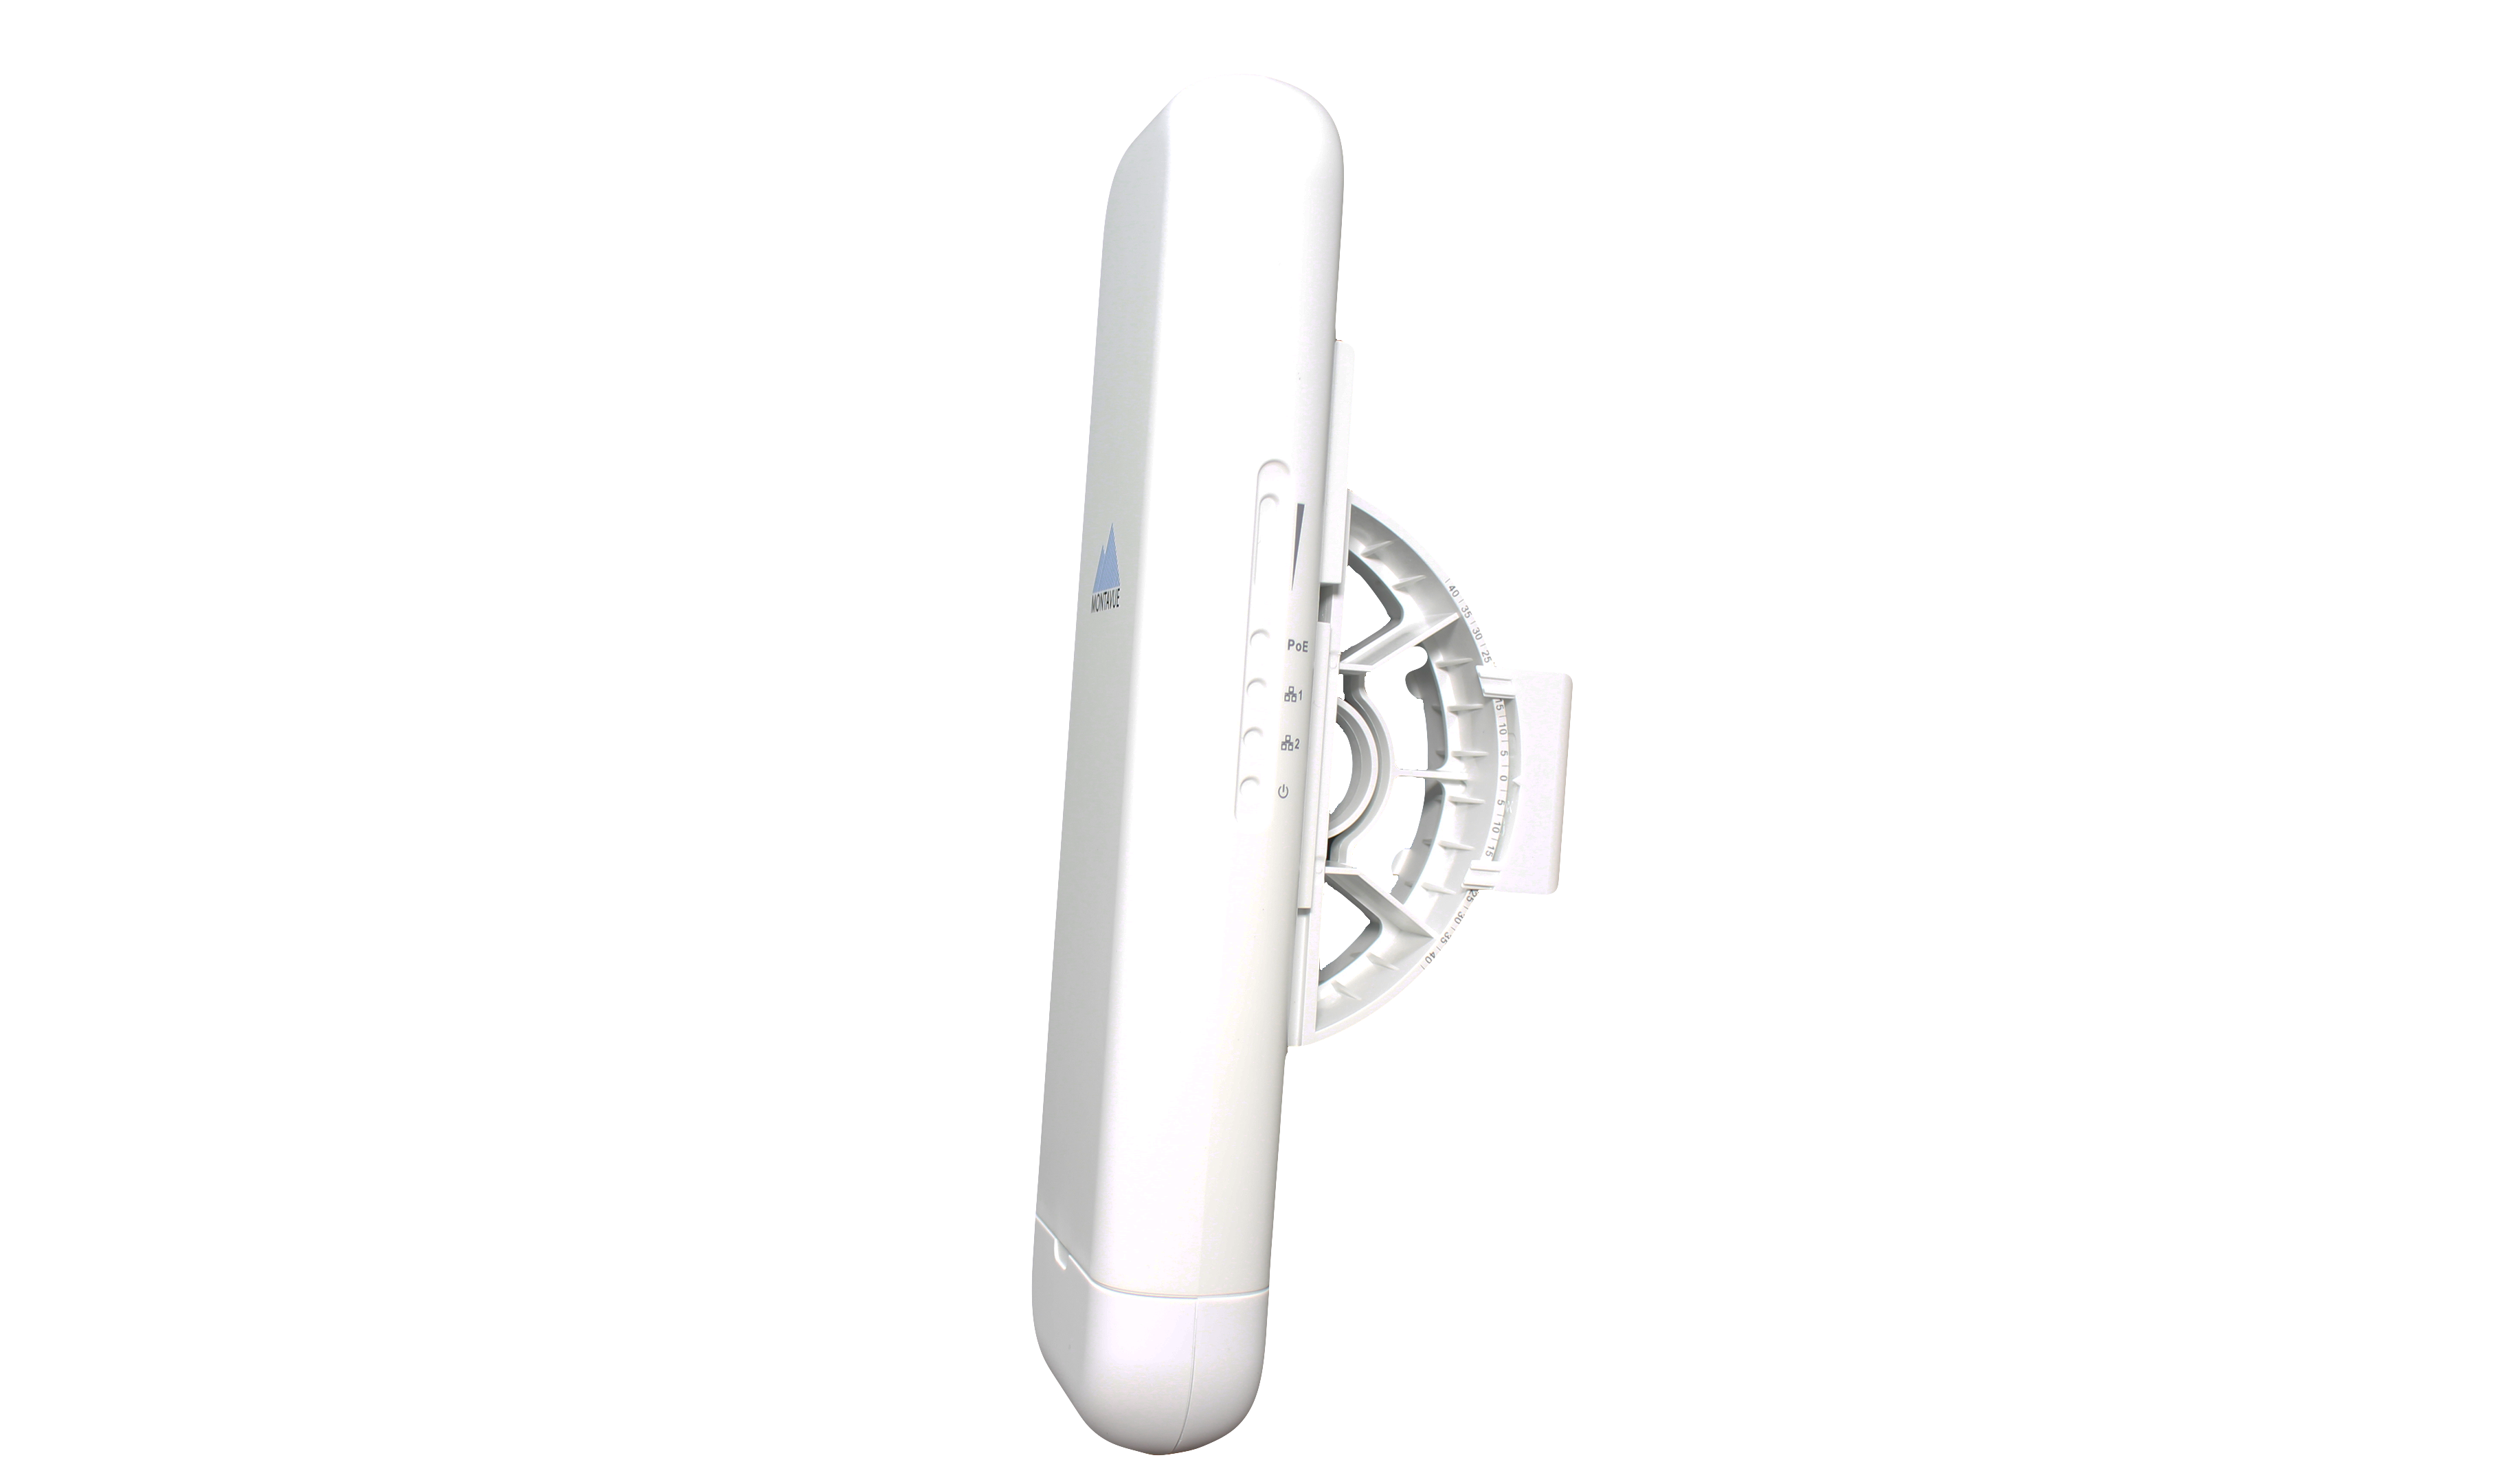 MAWB-03P | 1.86 Mile Poe In/Out Wireless Bridge - 867 Mbps (2.4GHz, 5GHz) - Montavue